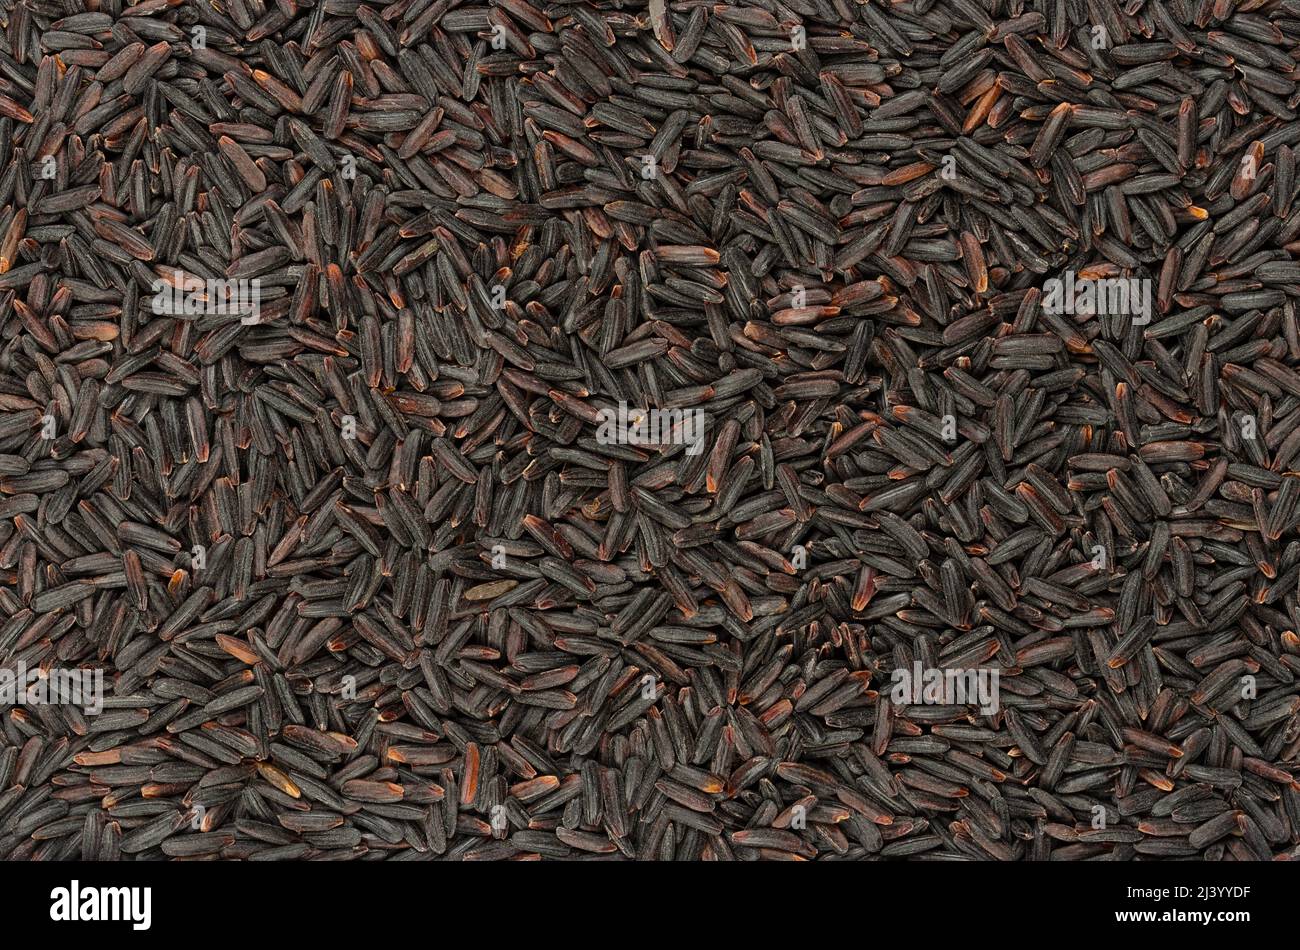 Riceberry rice grains, background and surface. Cross-bred rice variety from Thailand, with soft, deep purple whole grain rice grains. Stock Photo